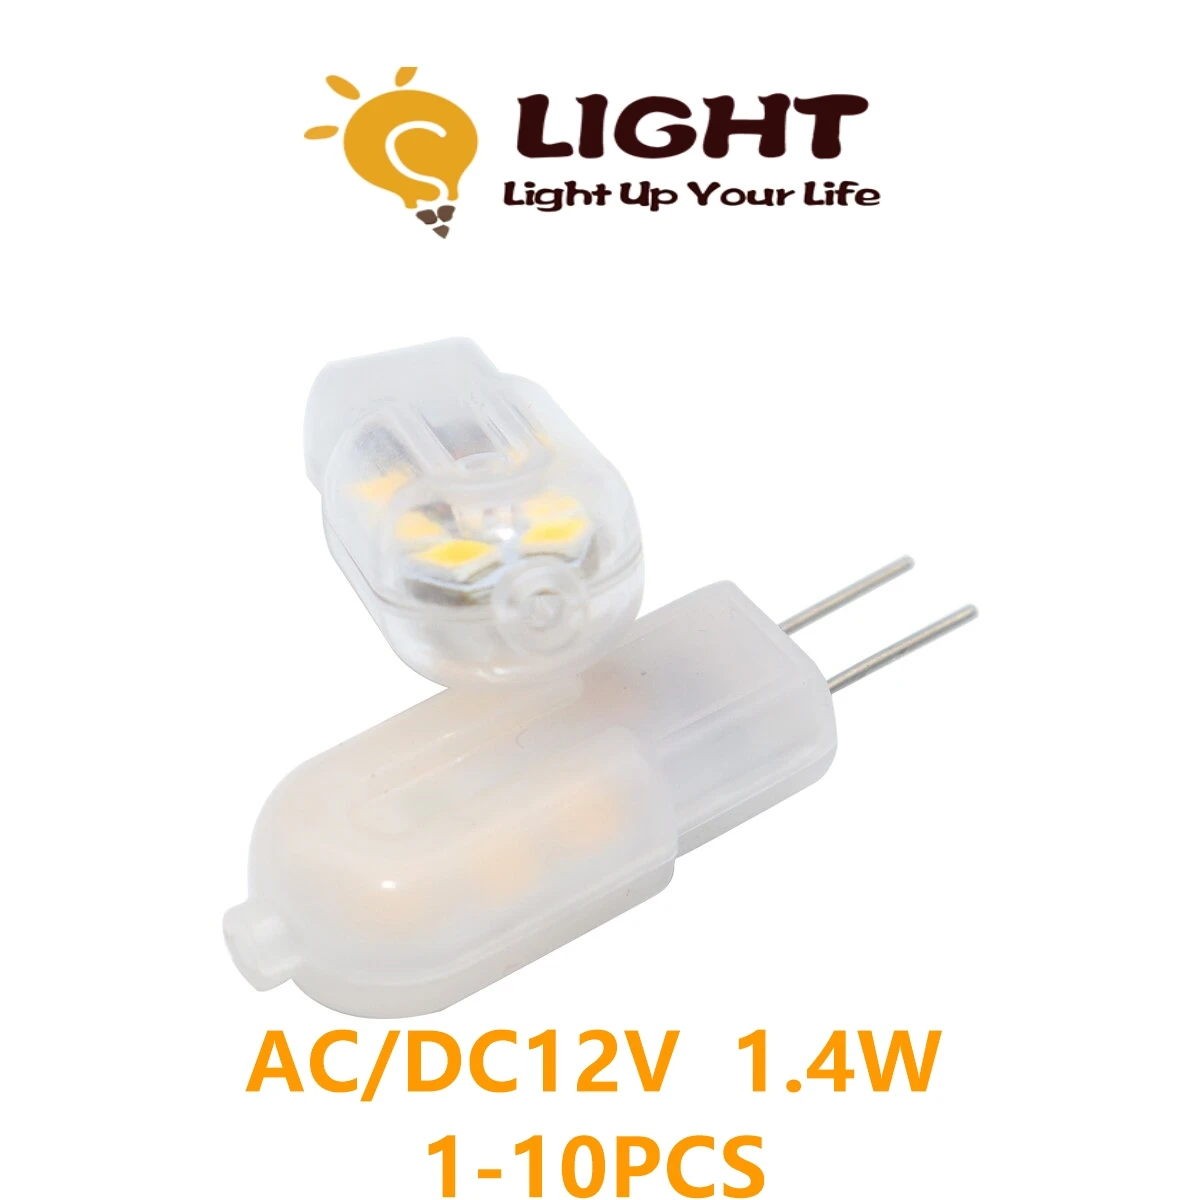 

1-10PCS LED Mini Bulb G4 AC/DC 12V 1.4W High Bright 3000k/4000k/6000k Suitable for Crystal Lamp Living Room and Office Lighting